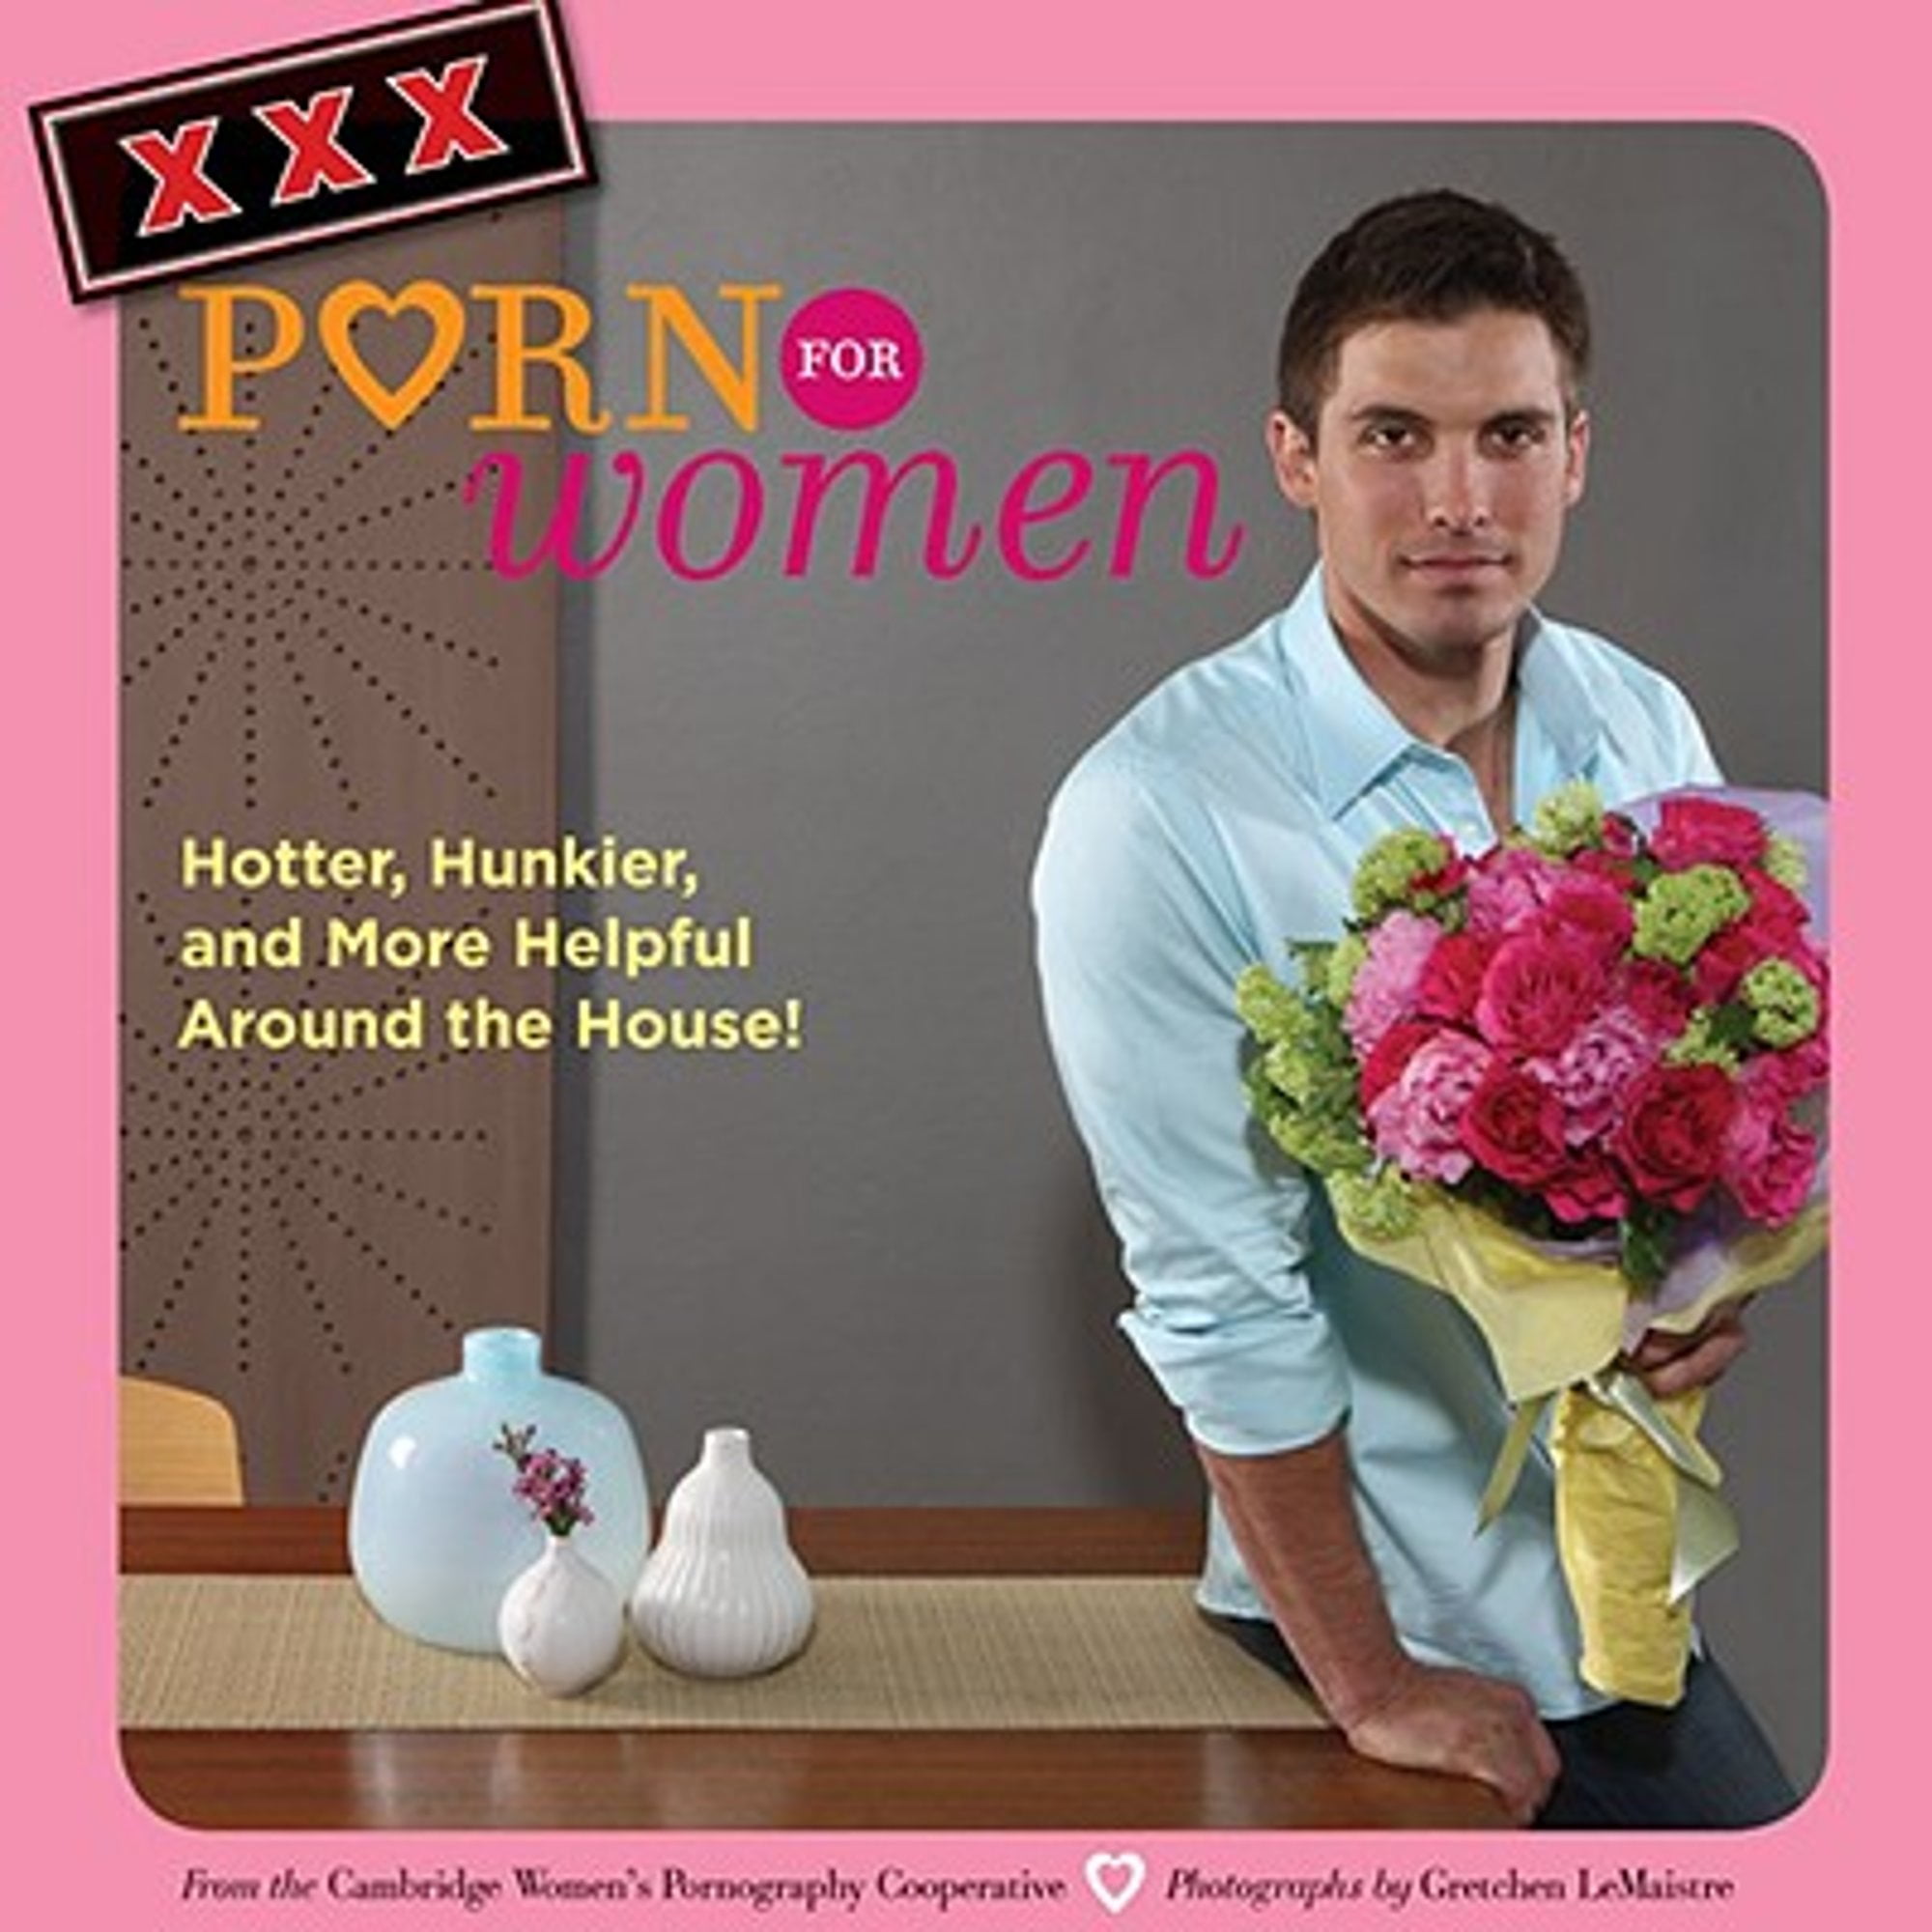 2000px x 2000px - XXX Porn for Women : Hotter, Hunkier, and More Helpful Around the House!  (Paperback) - Walmart.com